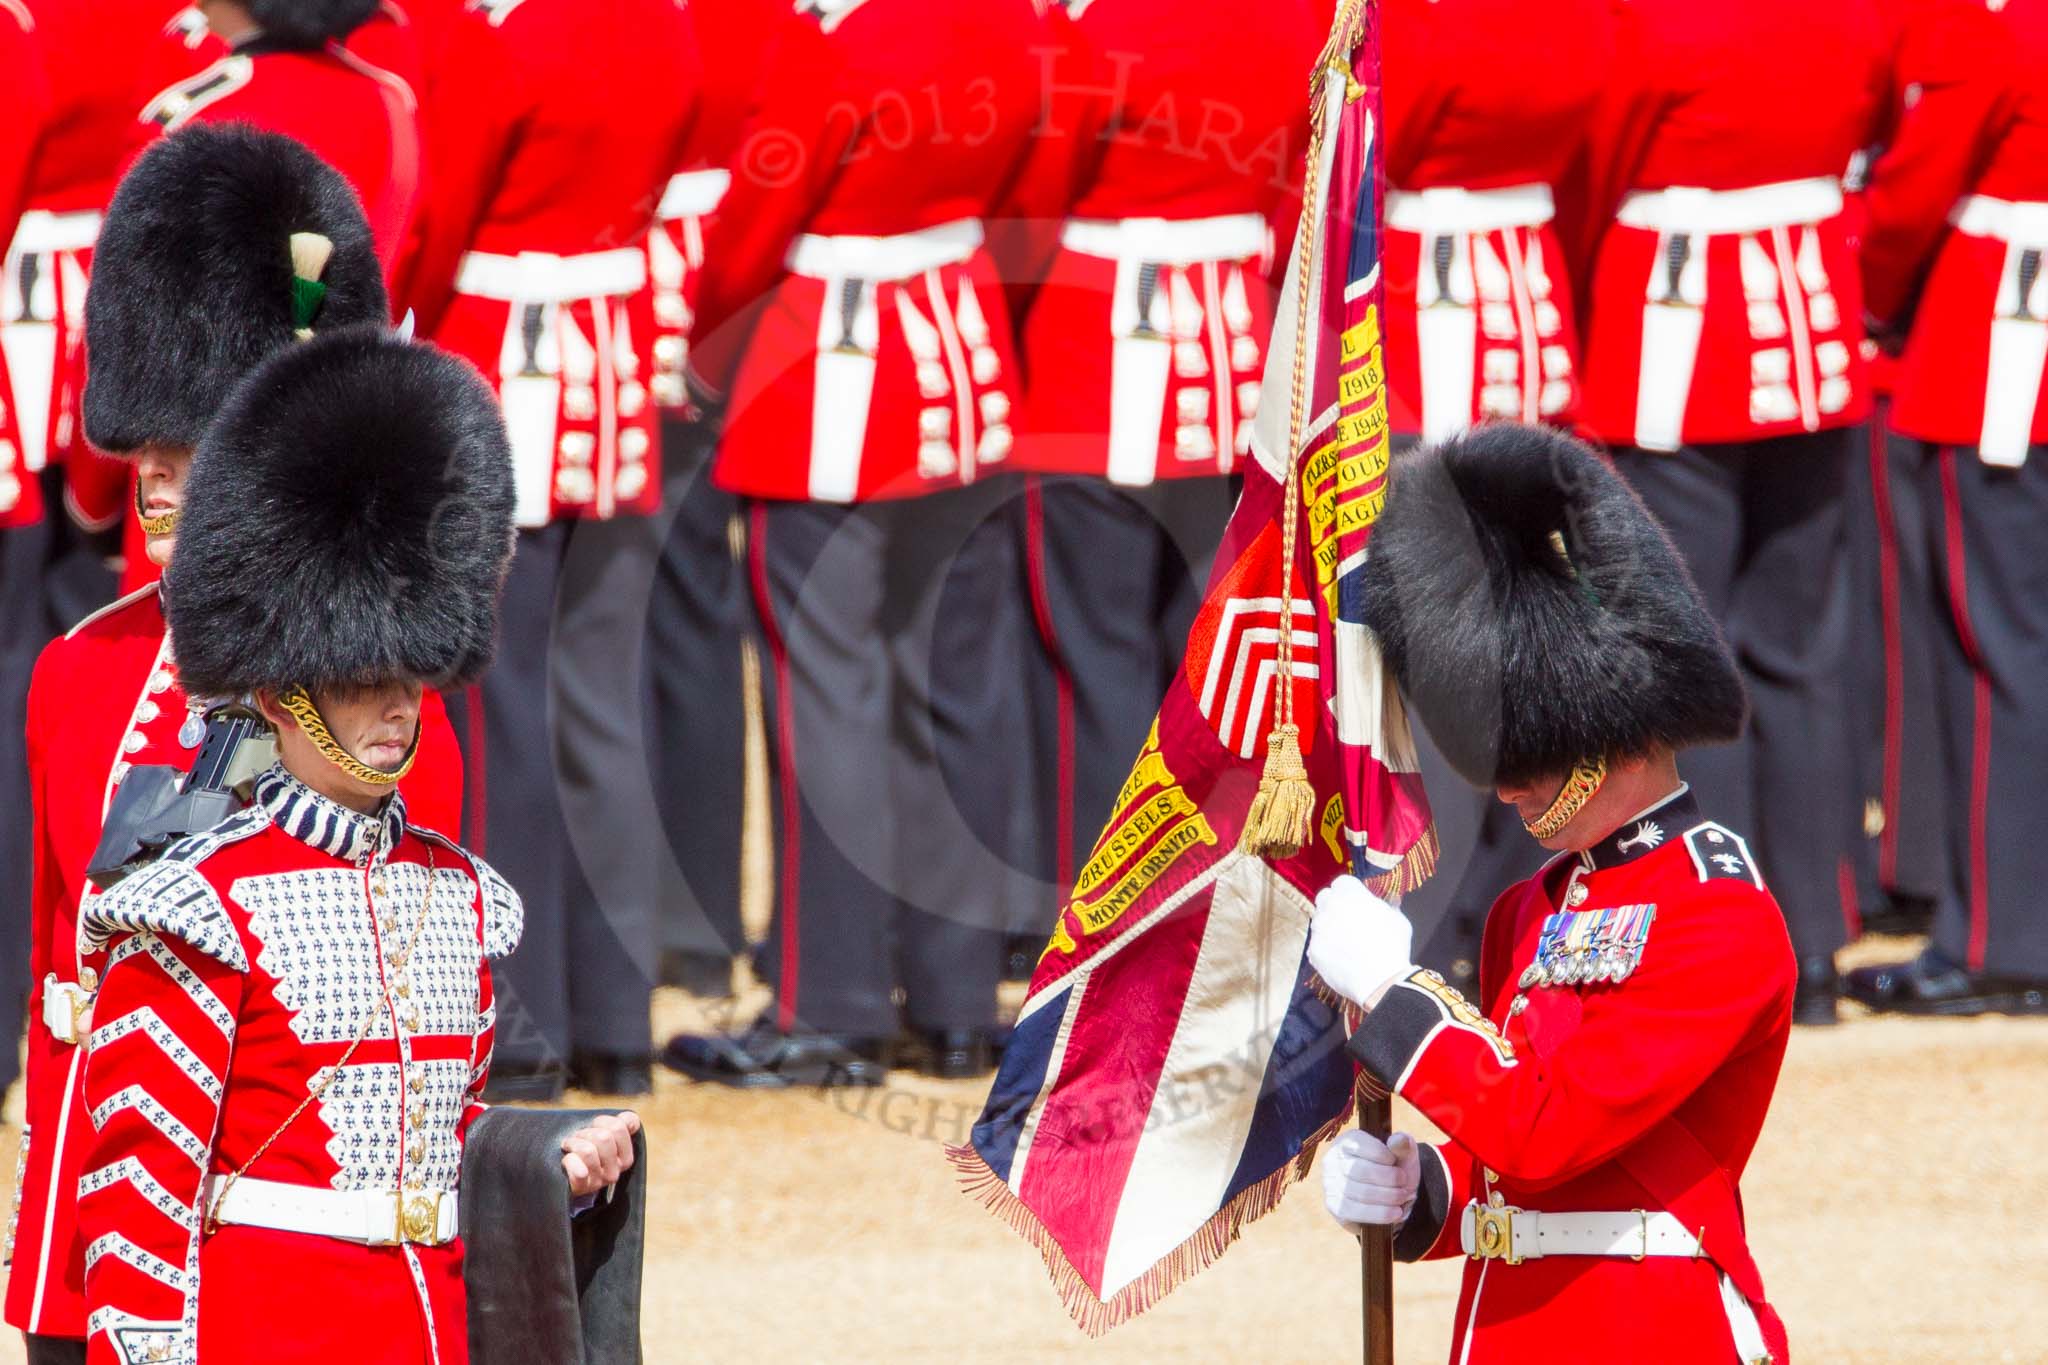 The Colonel's Review 2013: The Colour has been uncased. A detailed photographic record of the uncasing can be found in The Major Generals Review and The Colonels Review..
Horse Guards Parade, Westminster,
London SW1,

United Kingdom,
on 08 June 2013 at 10:33, image #150